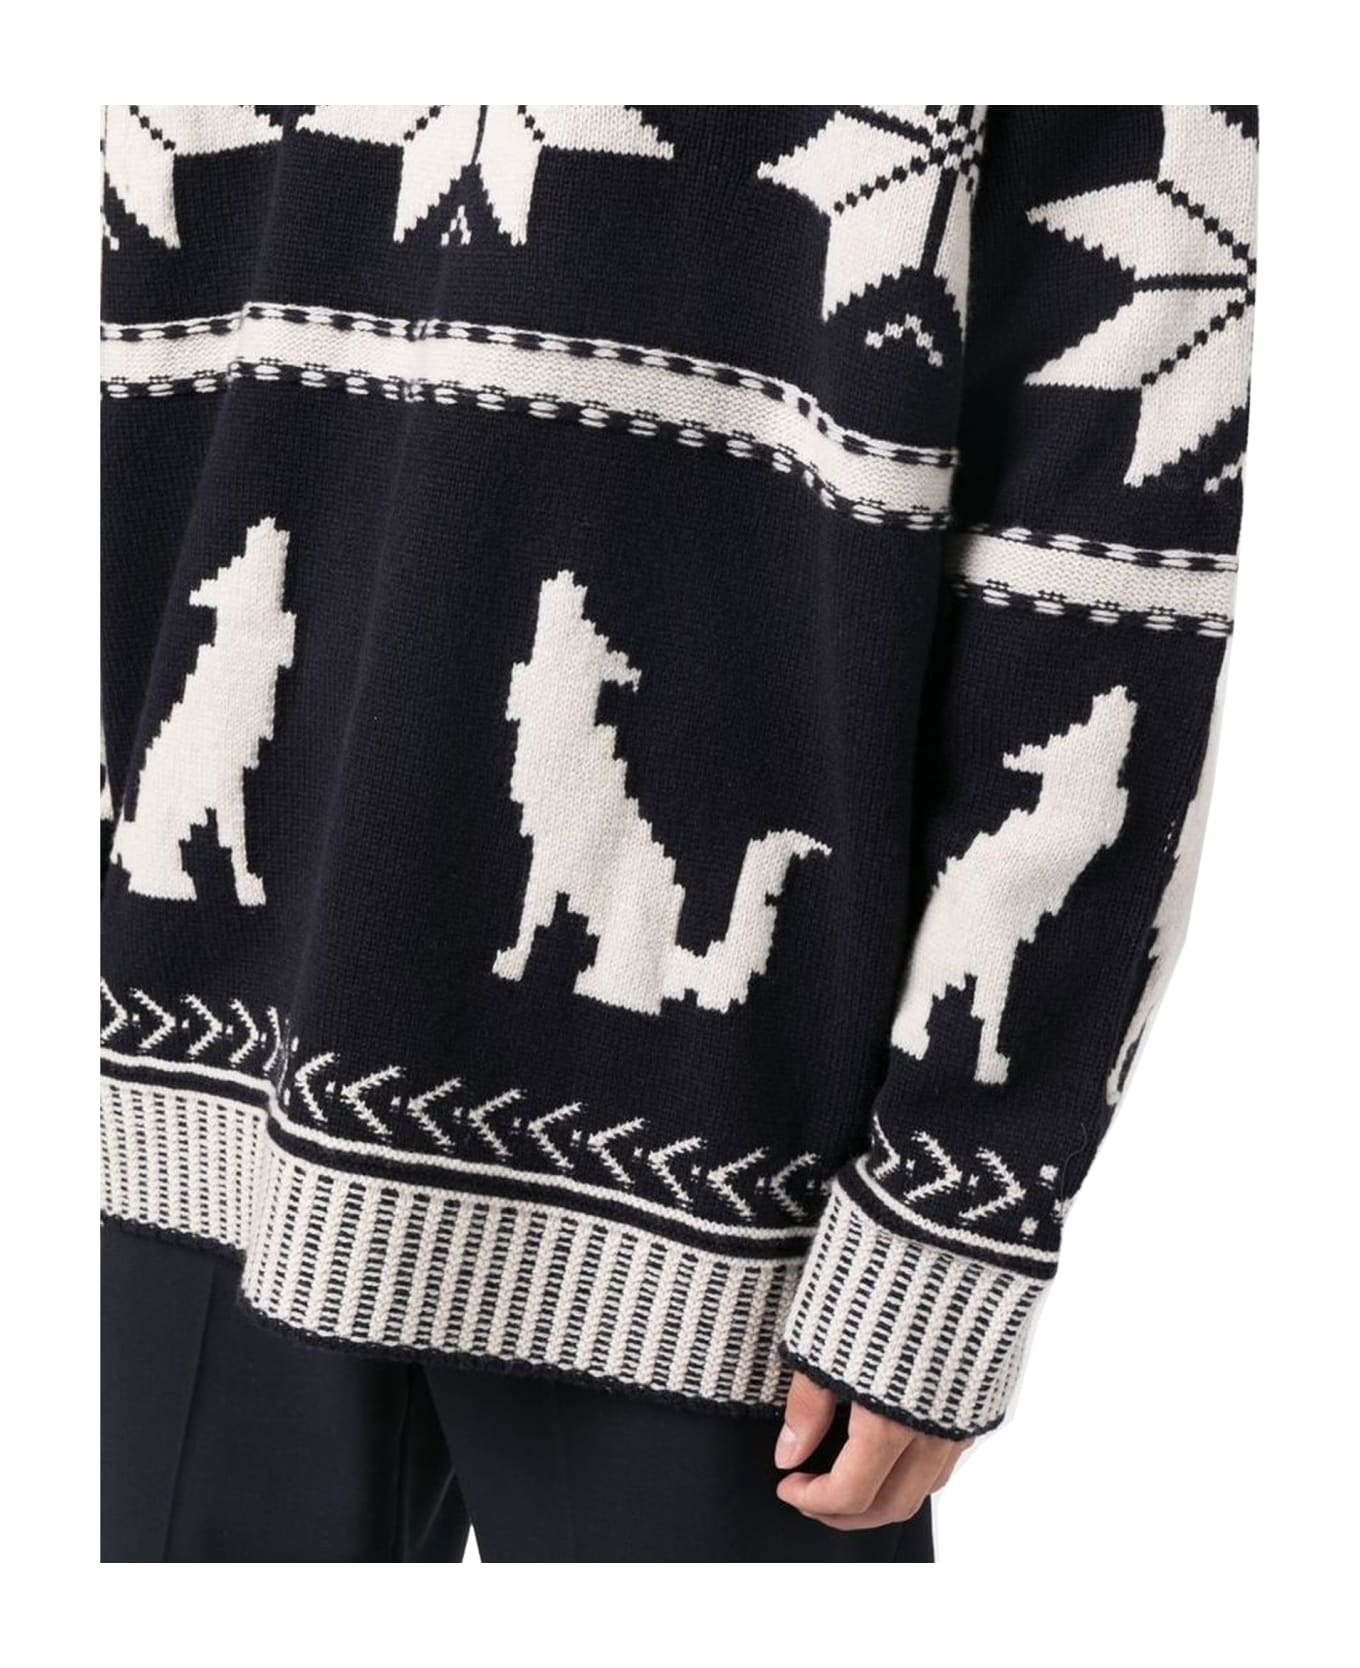 Etro Embroidered Cotton Sweater - Blue